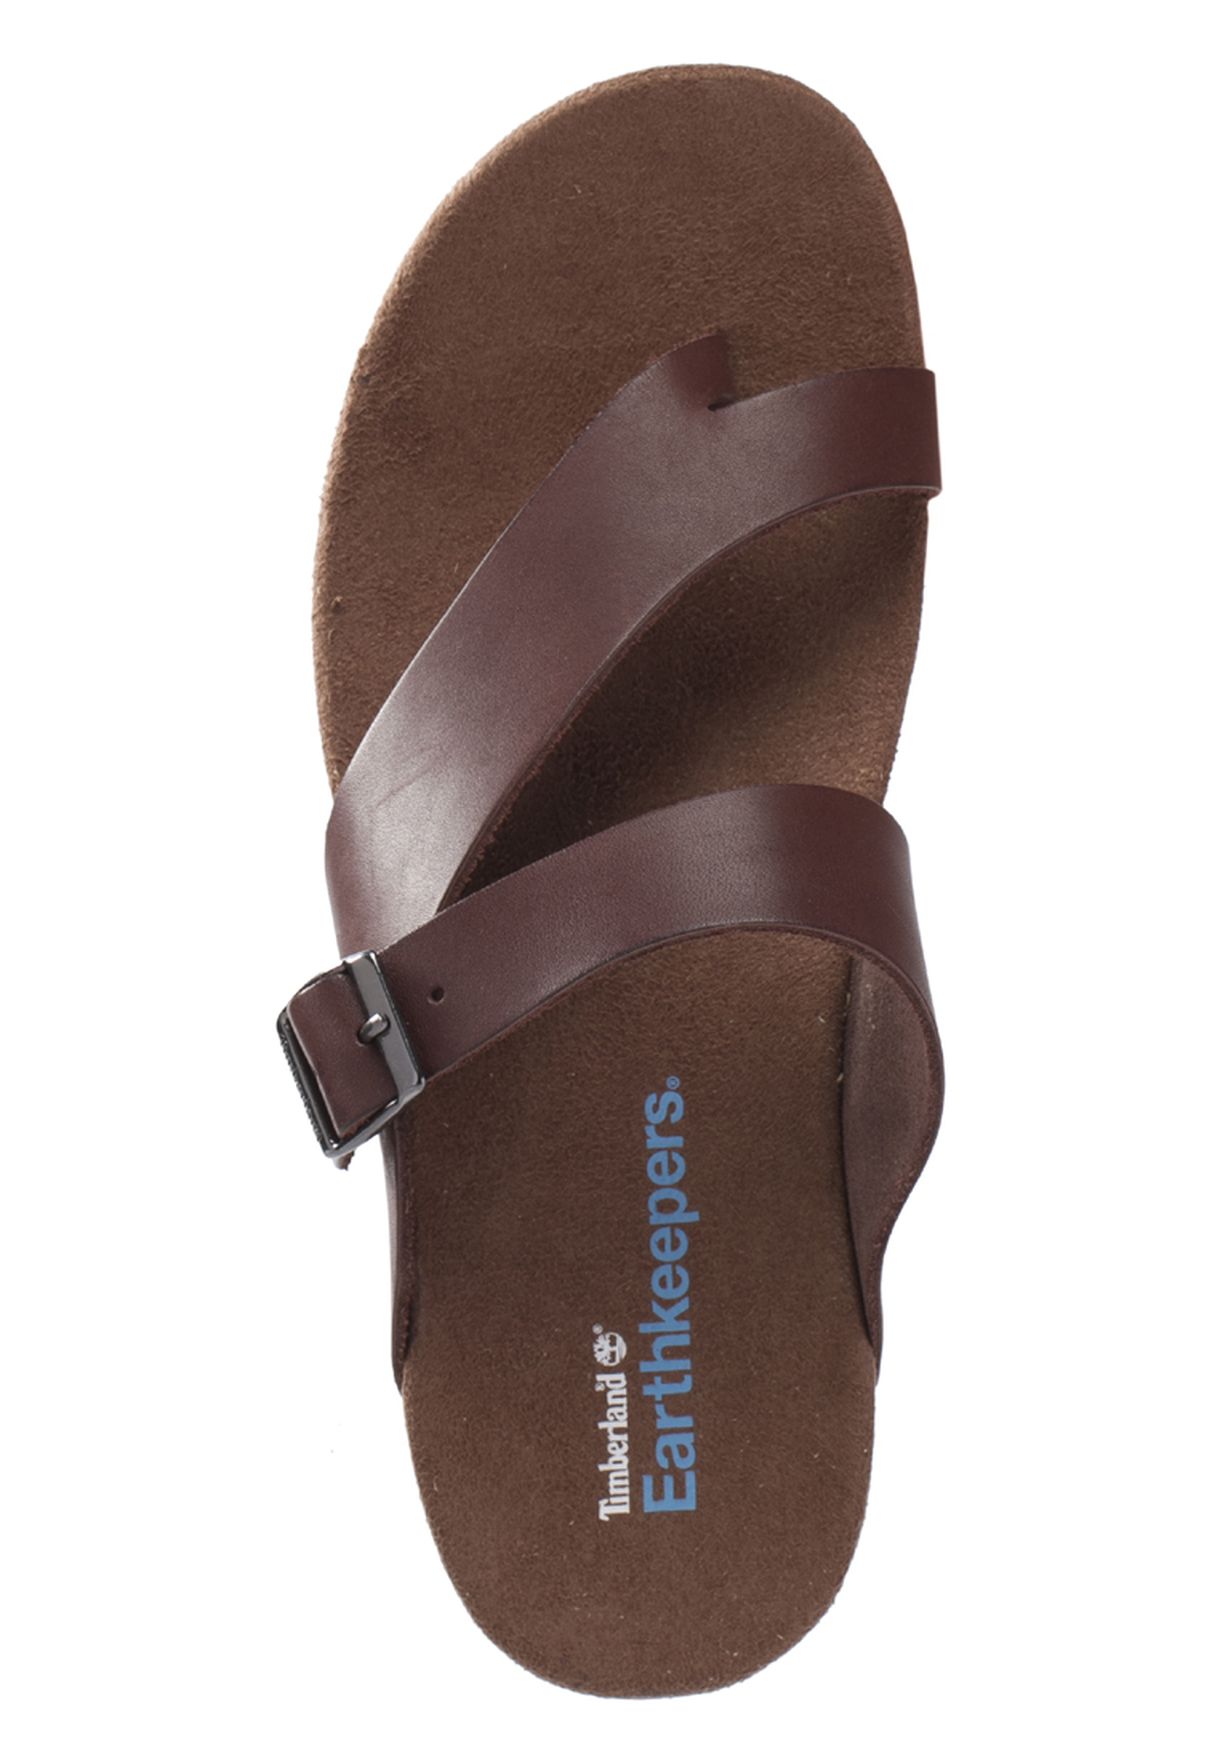 timberland earthkeepers sandals